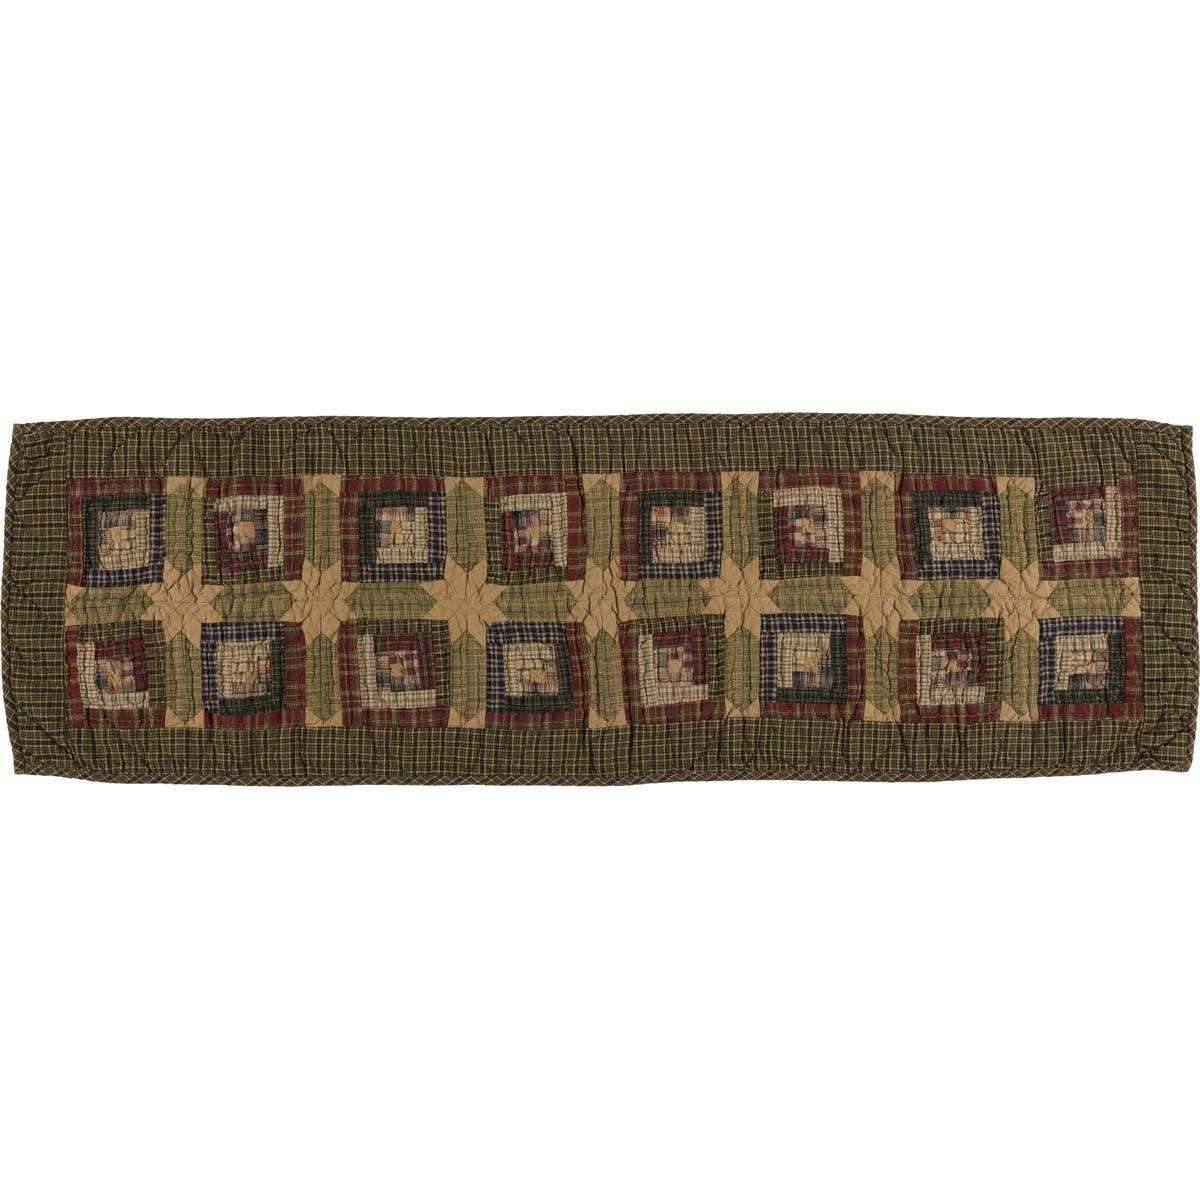 Tea Cabin Runner Quilted 13x48 VHC Brands - The Fox Decor